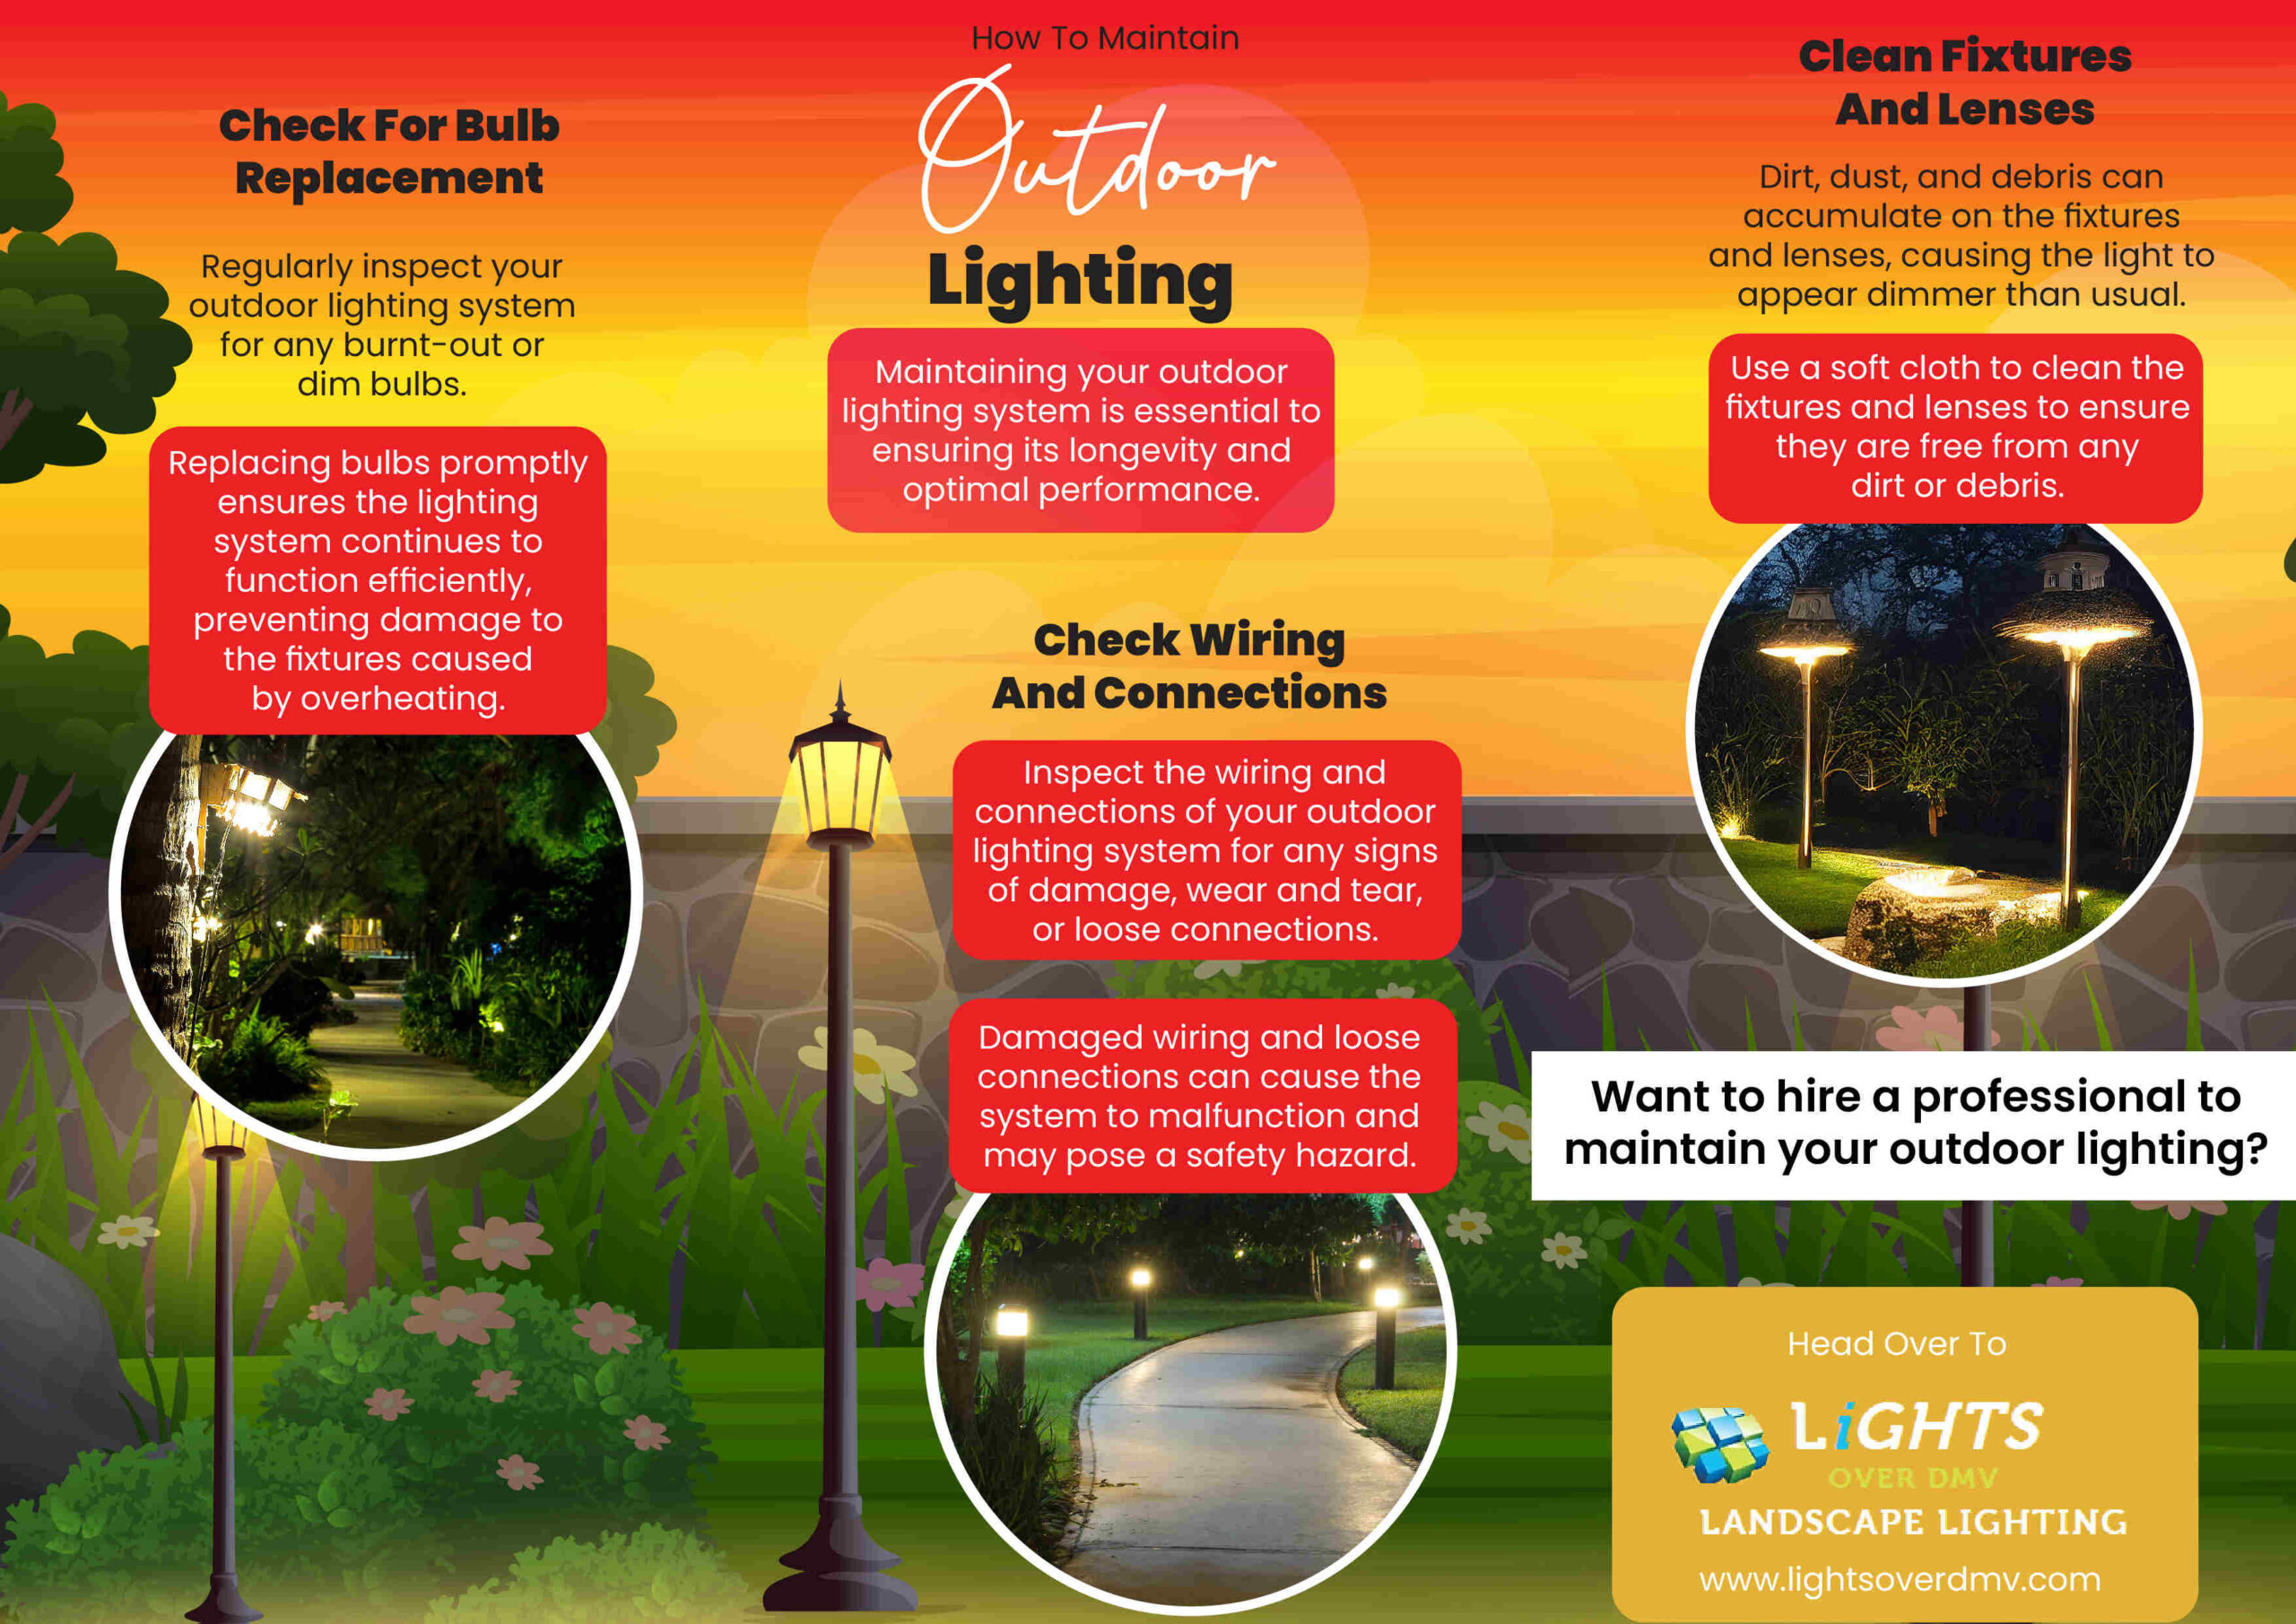 How To Maintain Outdoor Lighting